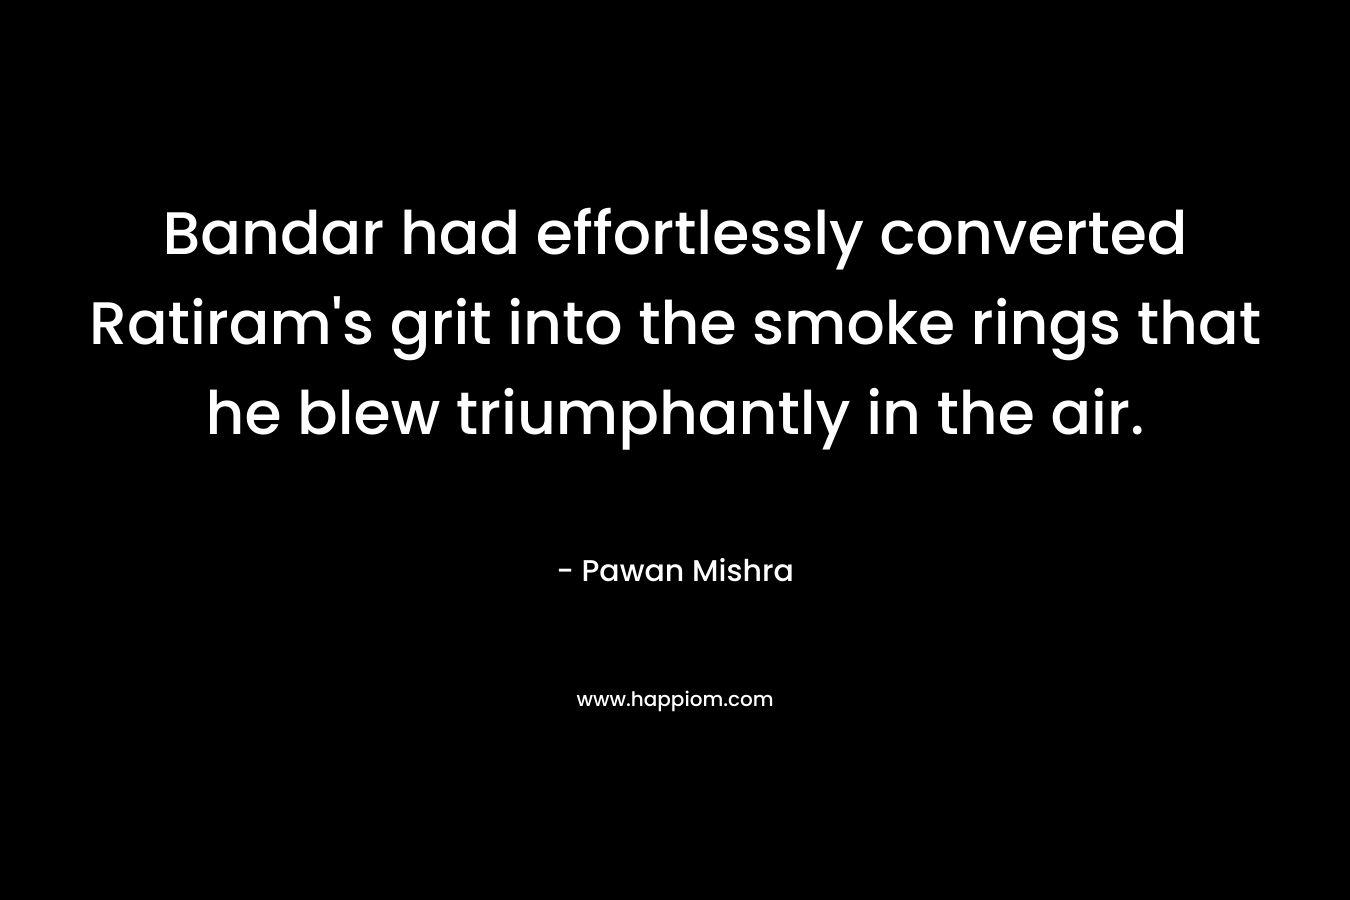 Bandar had effortlessly converted Ratiram's grit into the smoke rings that he blew triumphantly in the air.